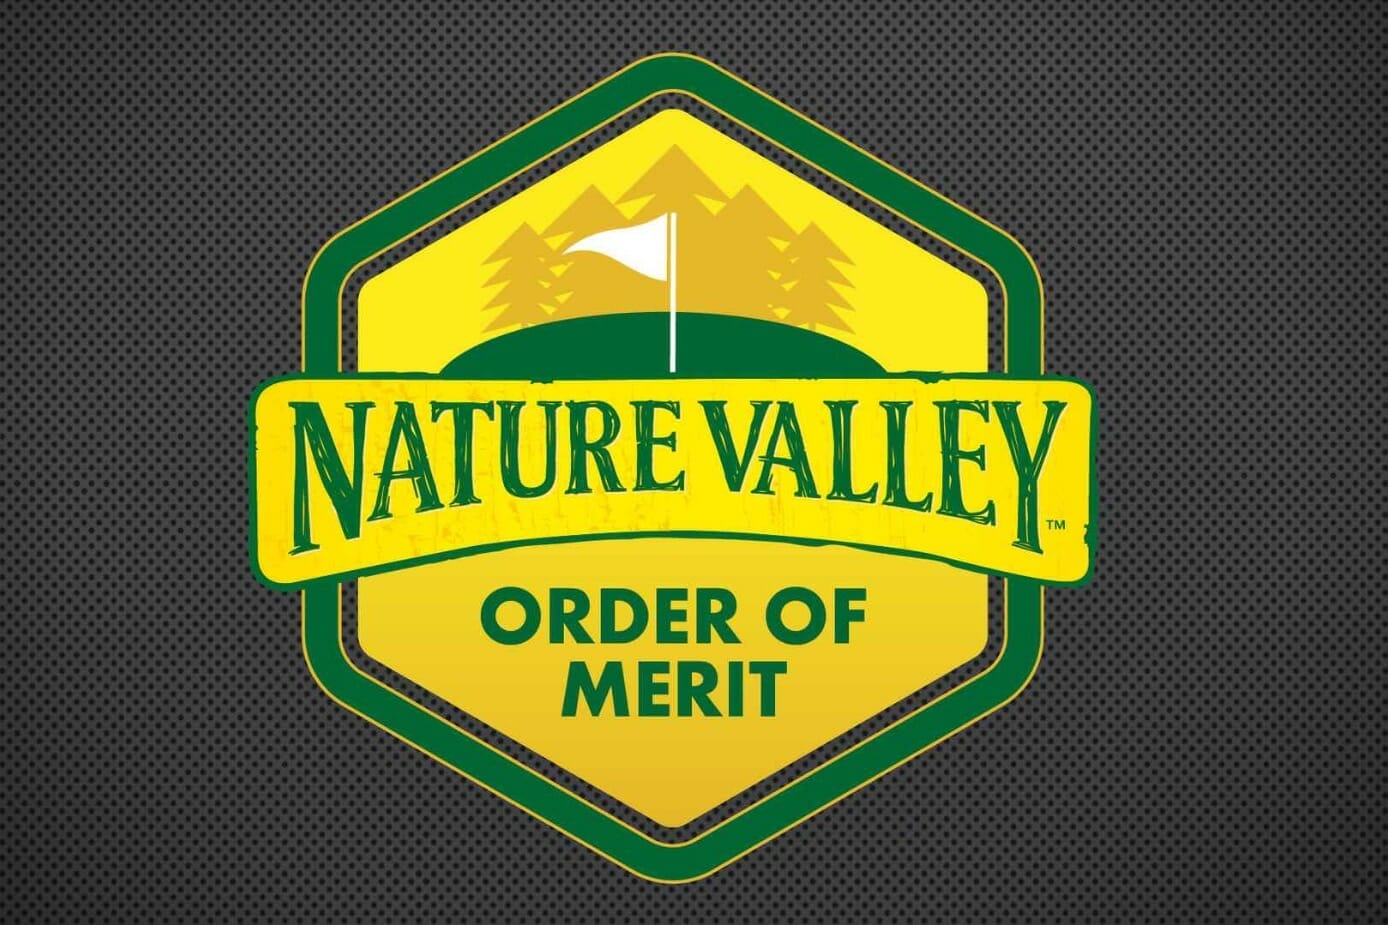 The cream is rising on the Nature Valley Order of Merit